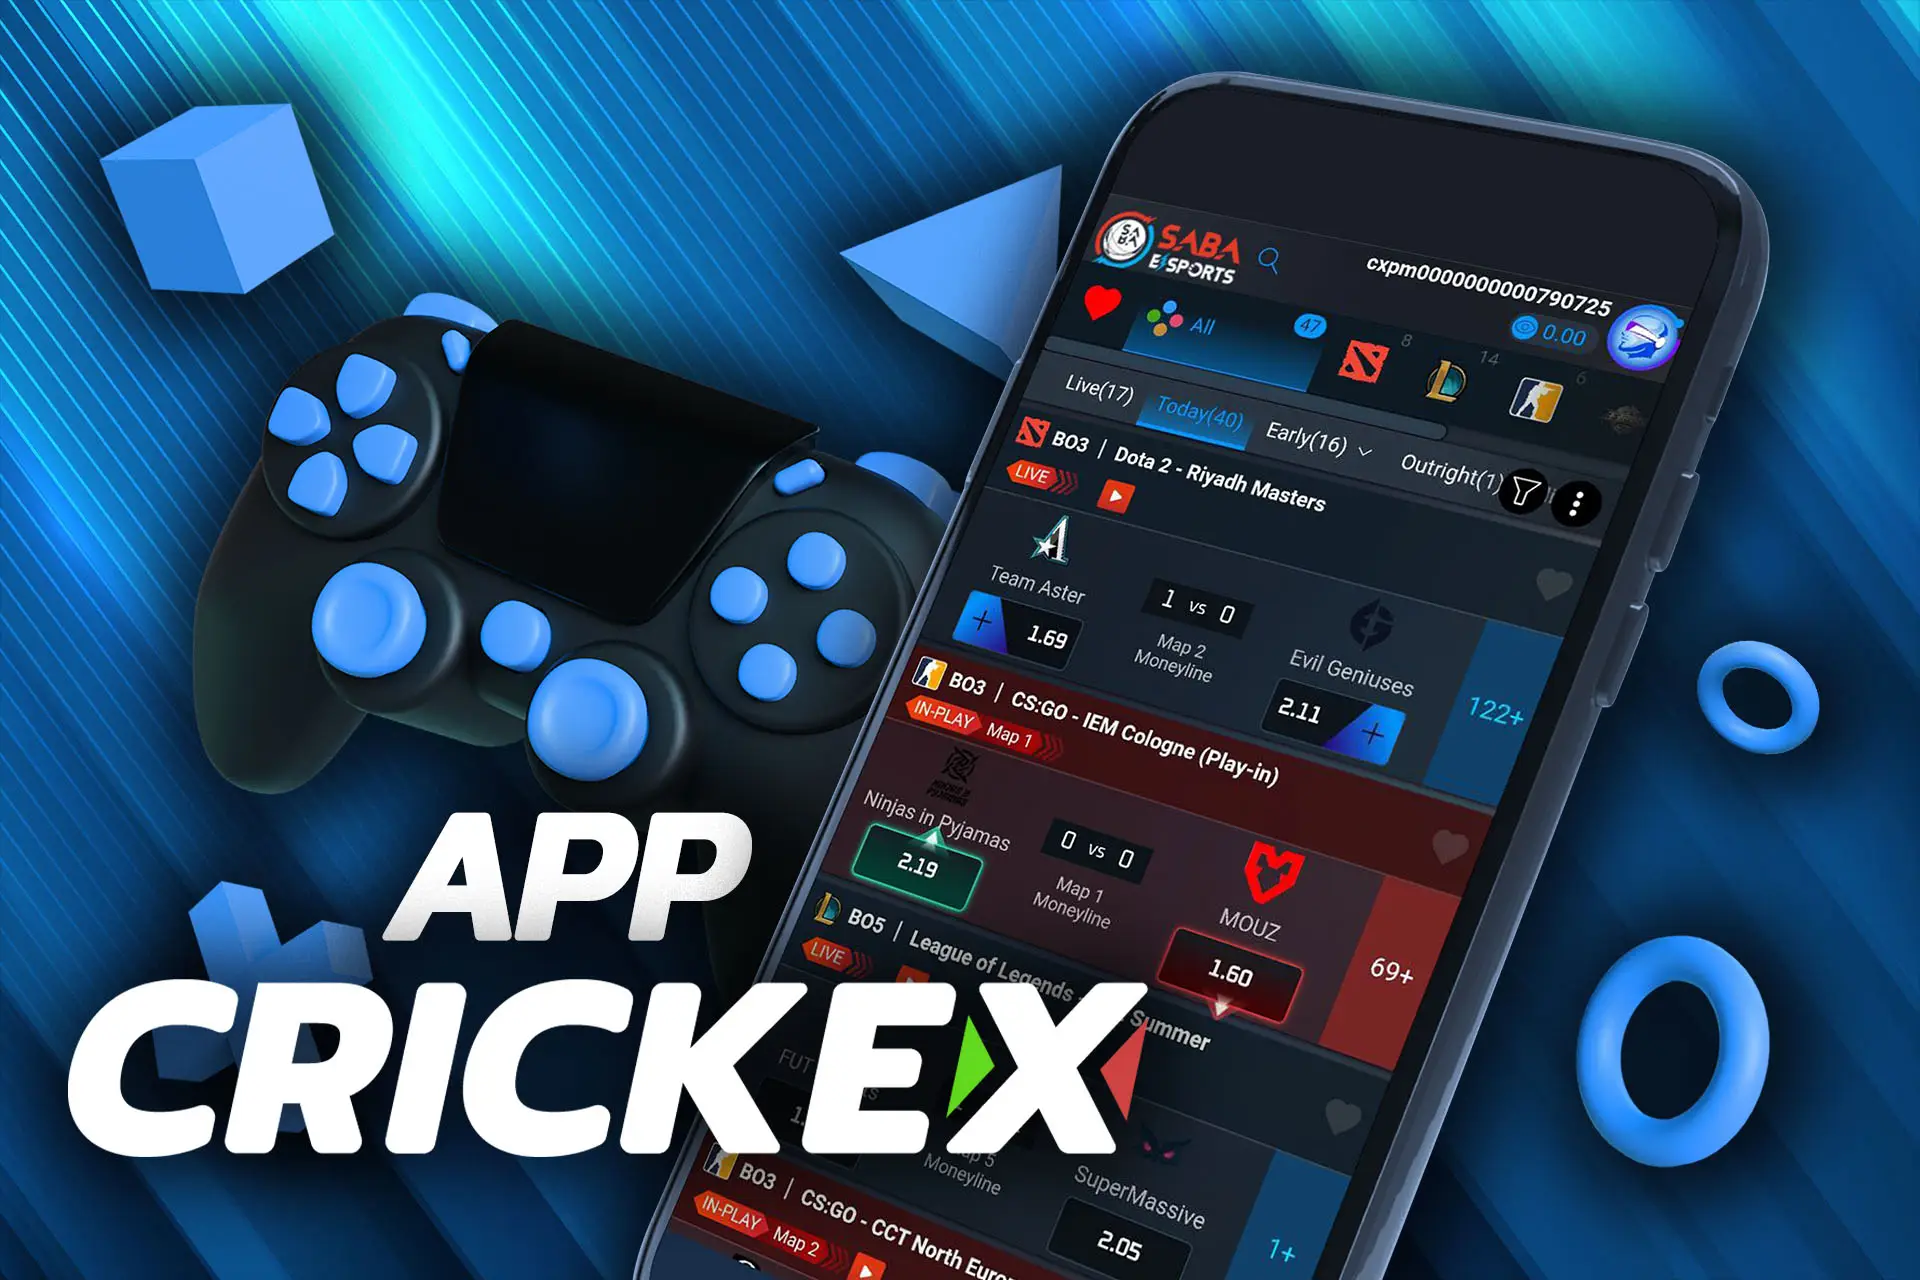 Place bets on cybersports in the Crickex app.